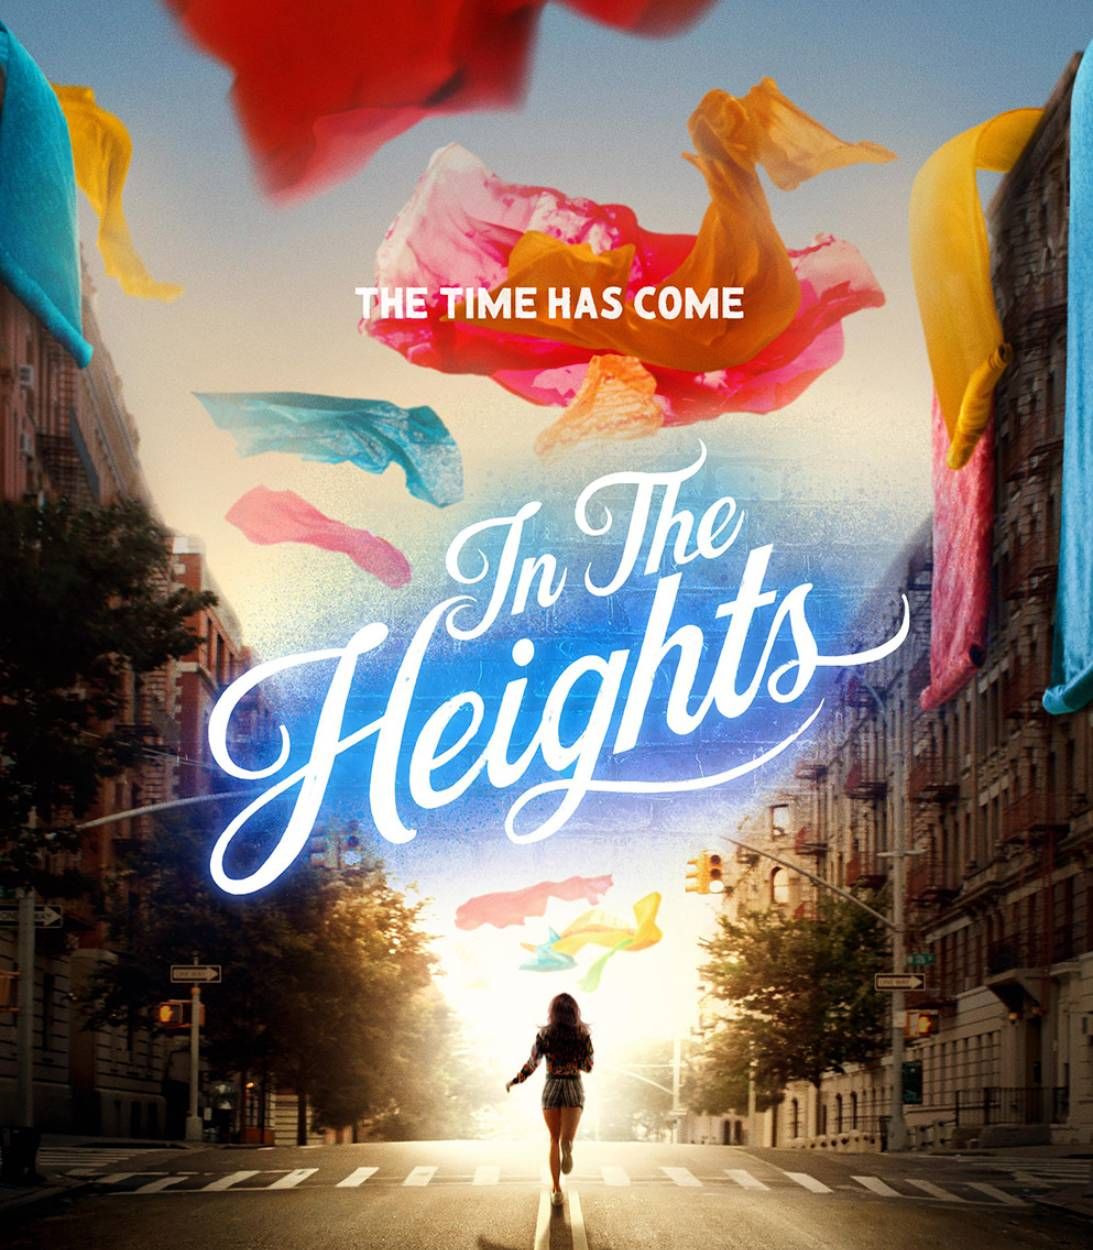 In The Heights movie poster 3 vertical